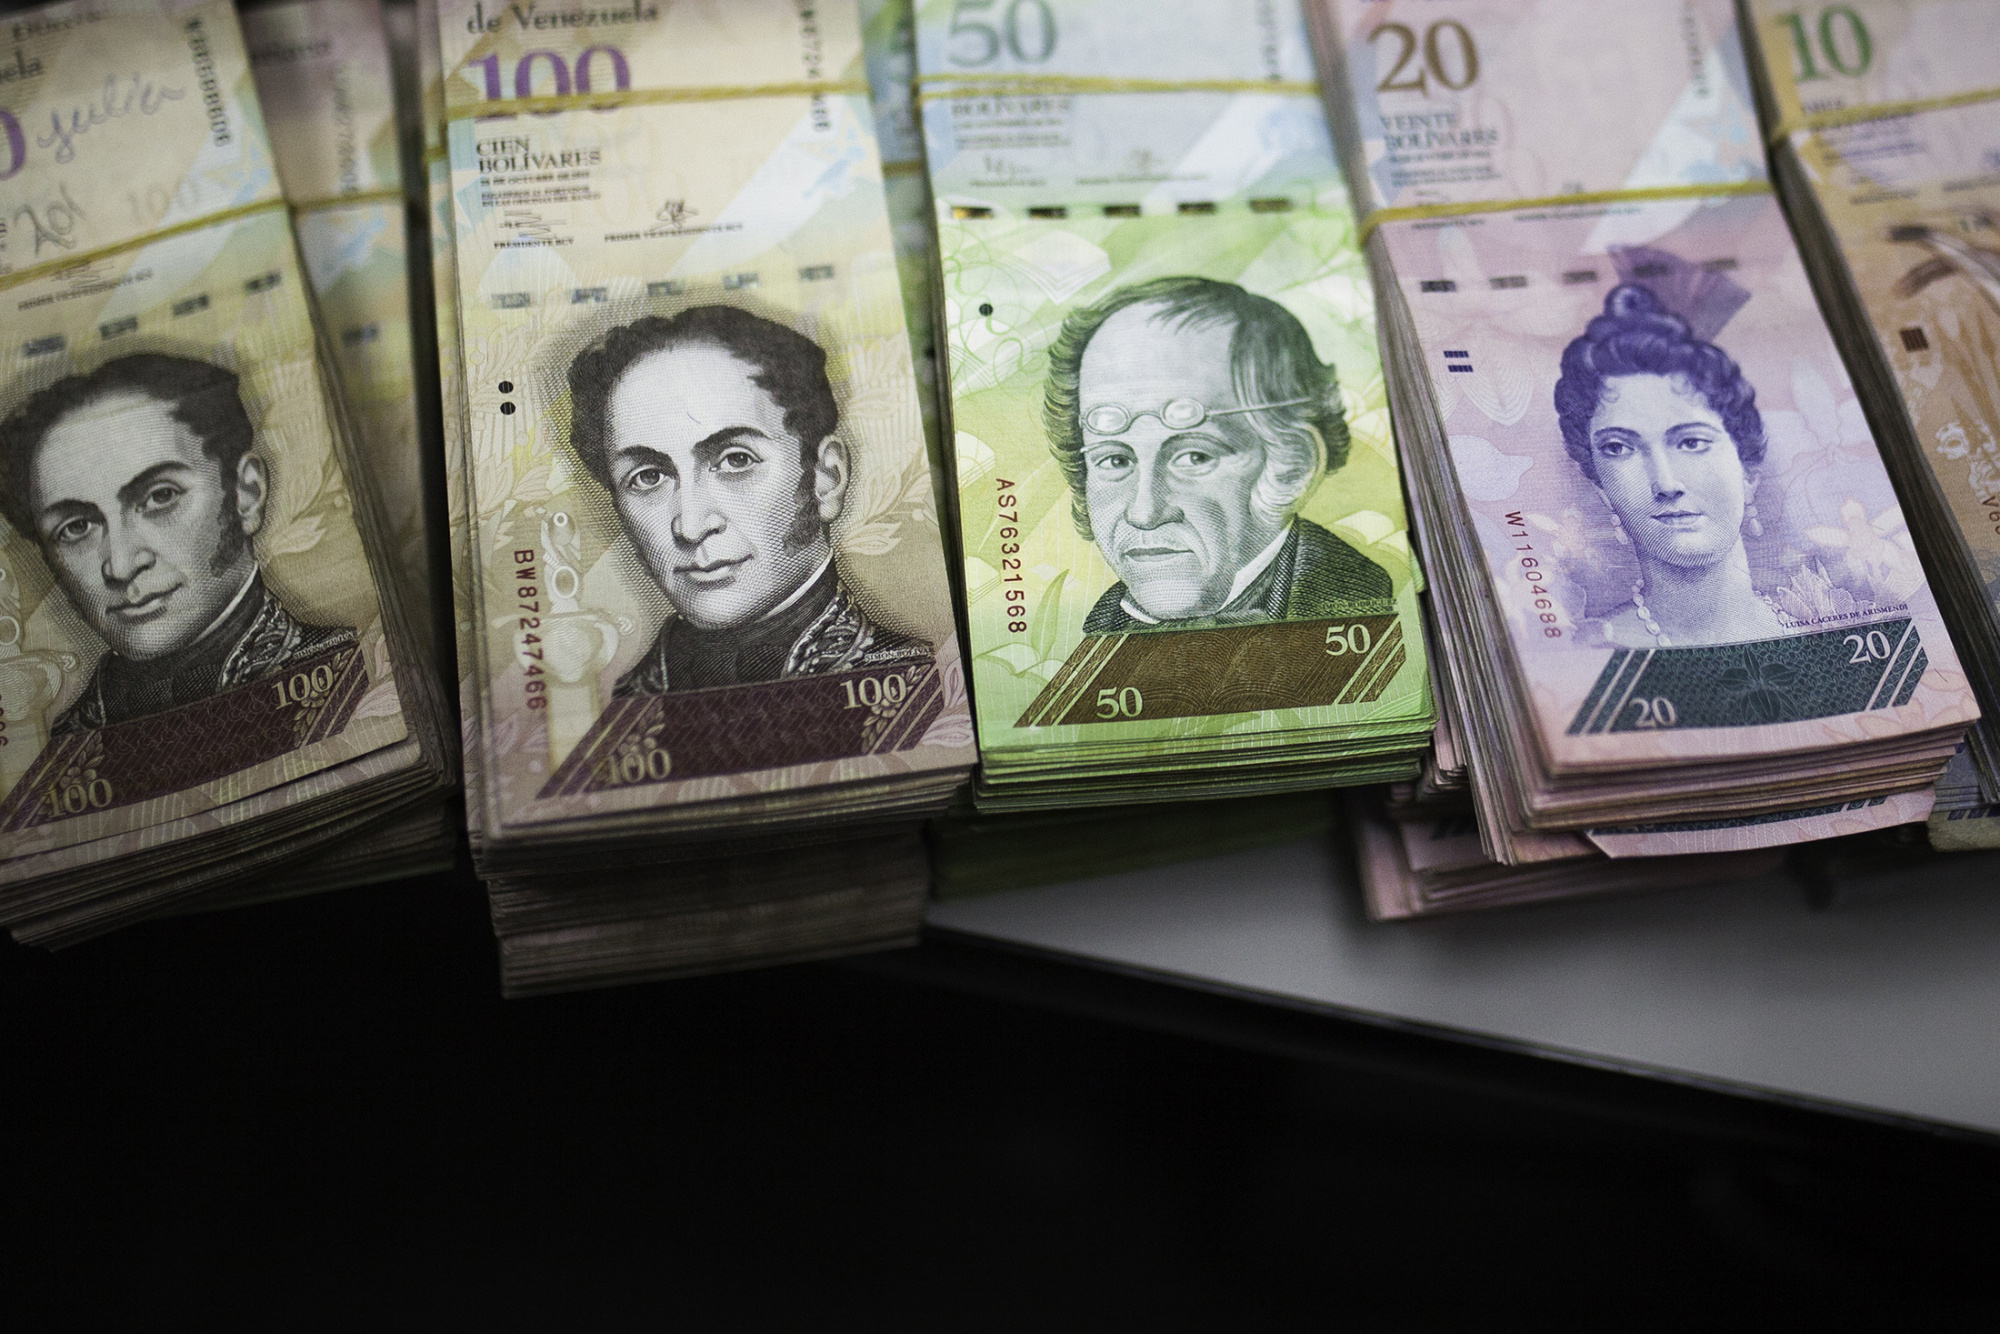 Bolivar notes separated for bank deposit are seen in the office of a bakery in Caracas, Venezuela, on Tuesday, Nov. 29, 2016.&nbsp;